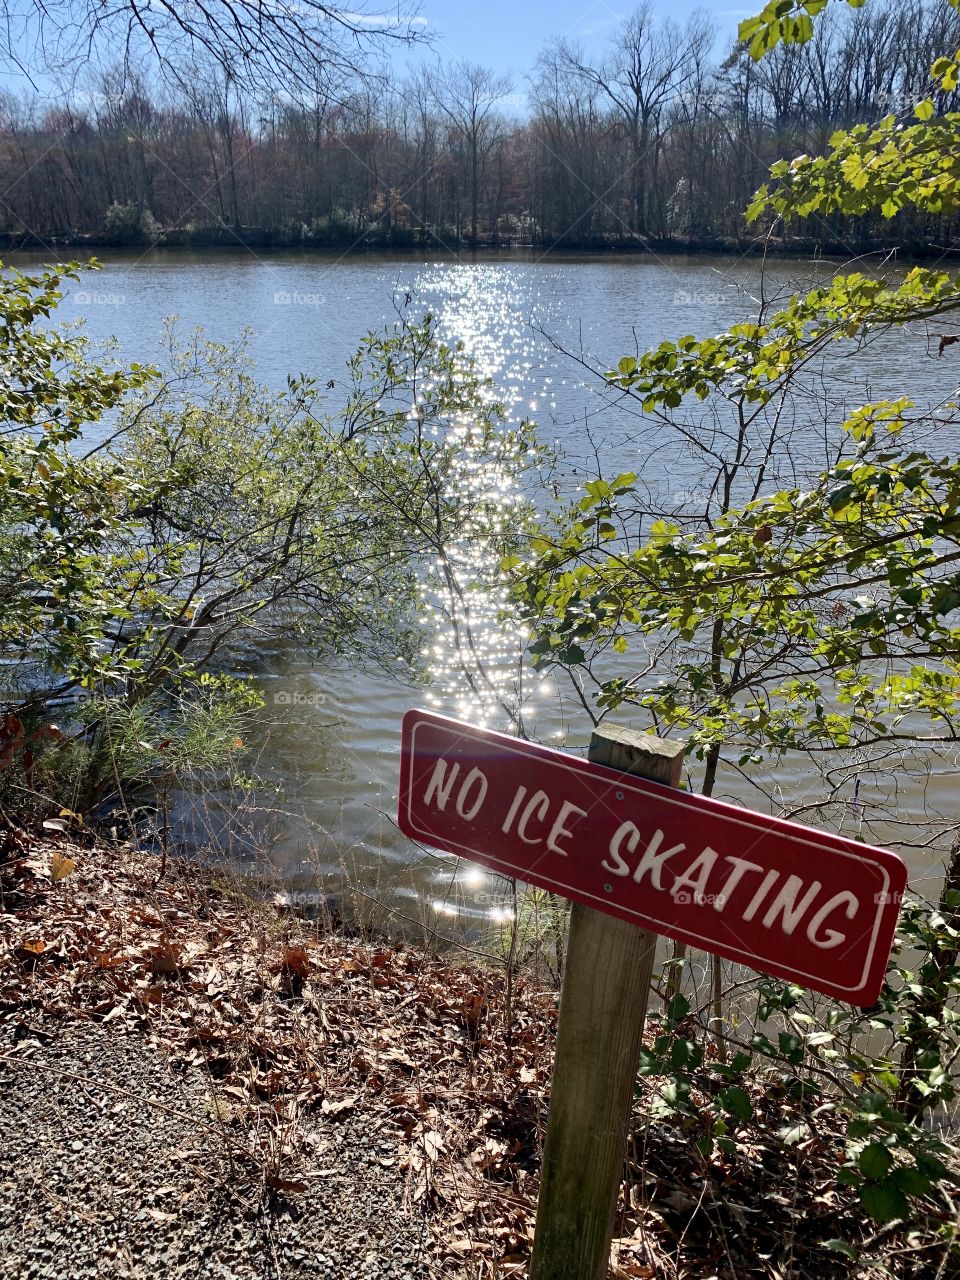 No Ice Skating on a beautiful day